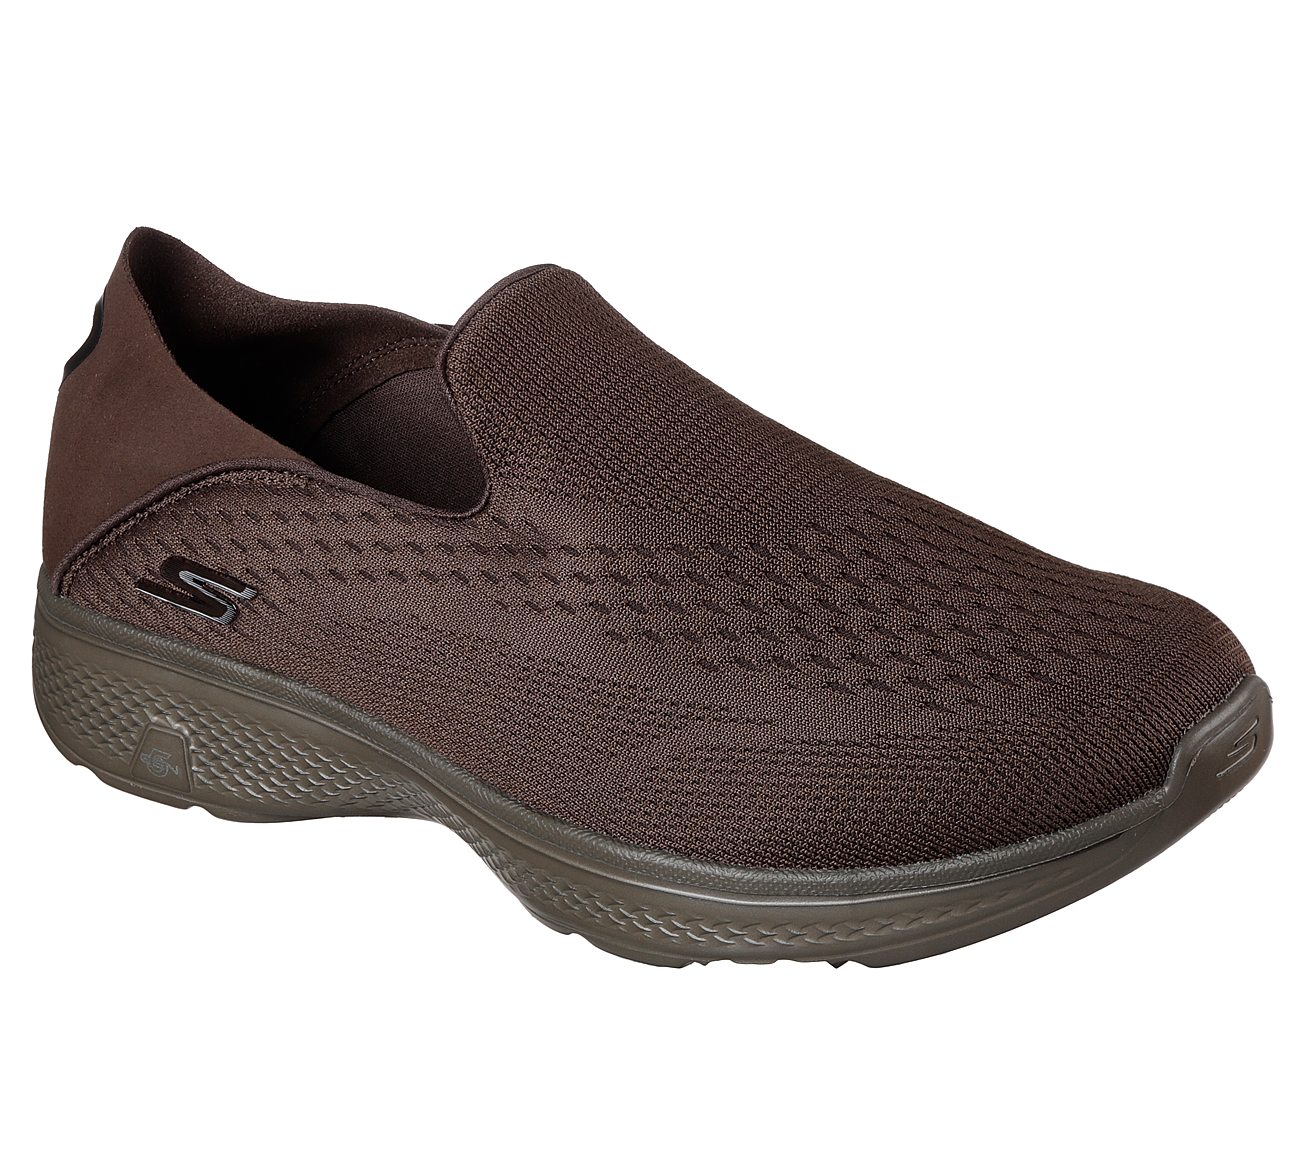 GO WALK 4- CONVERTIBLE, CCHOCOLATE Footwear Lateral View